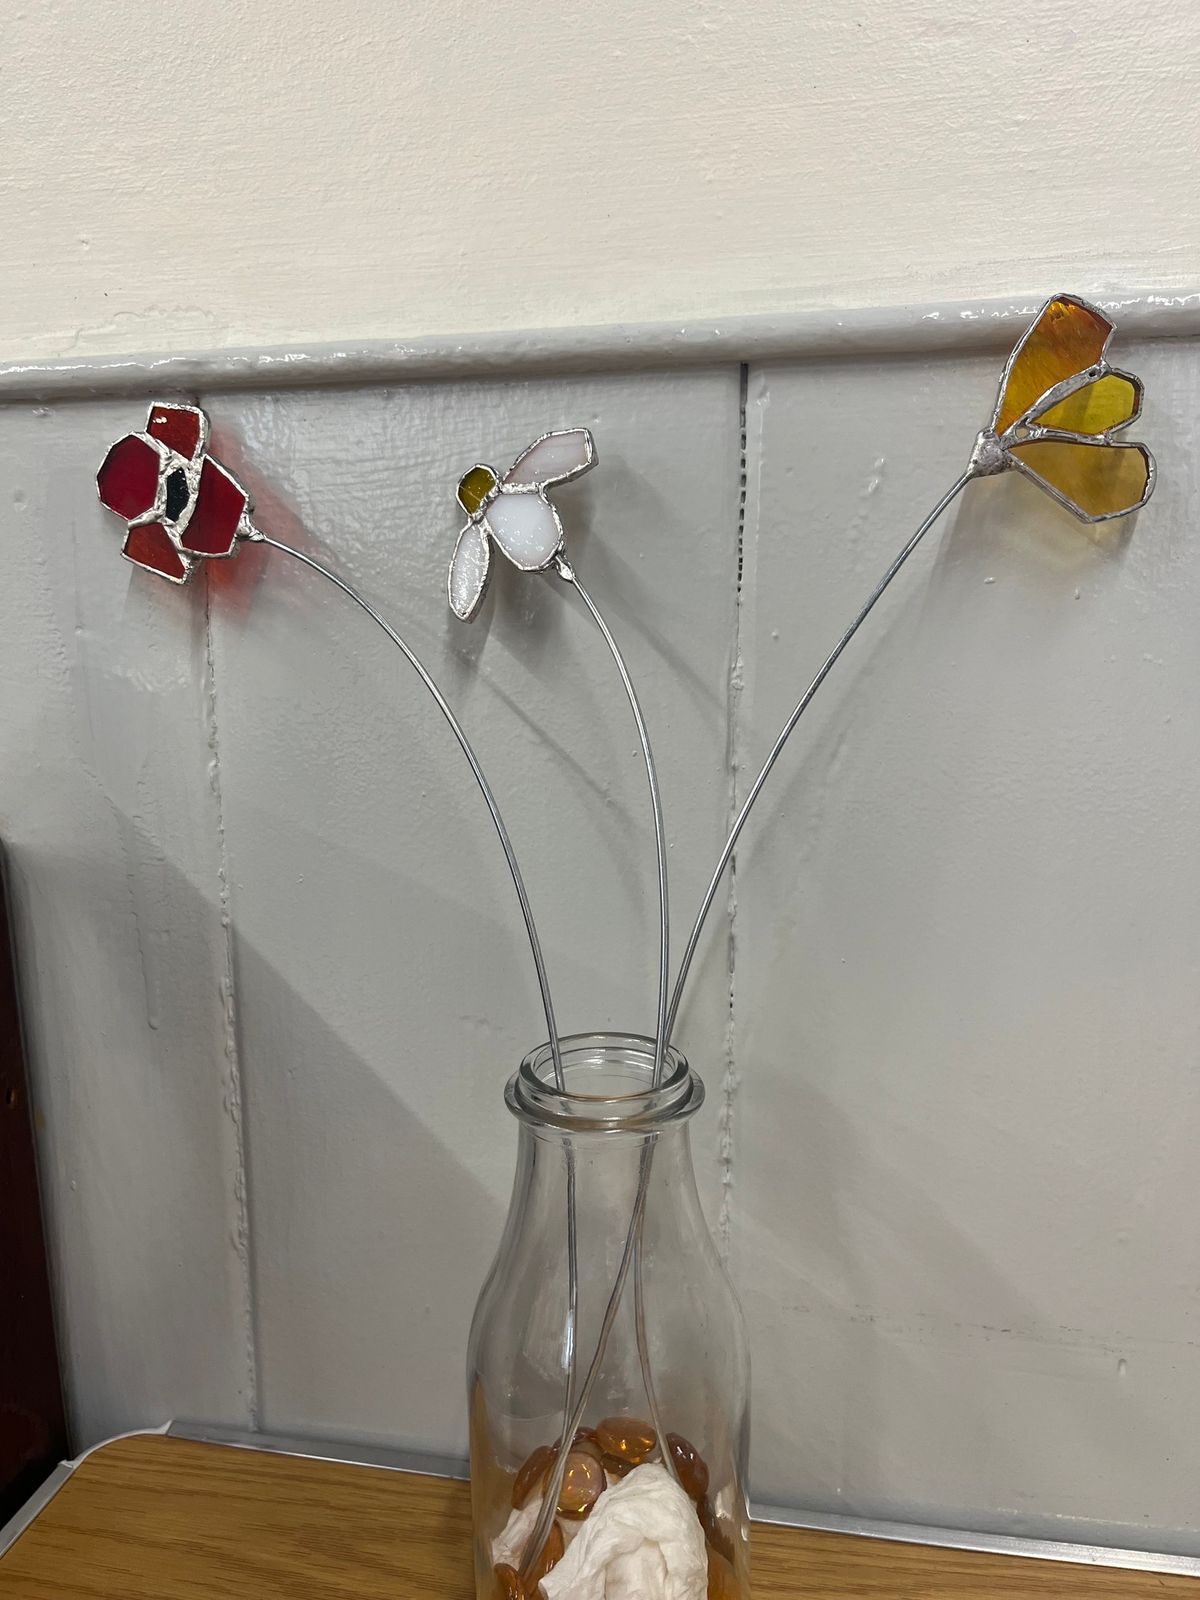 Making a Stained Glass Flower Bouquet